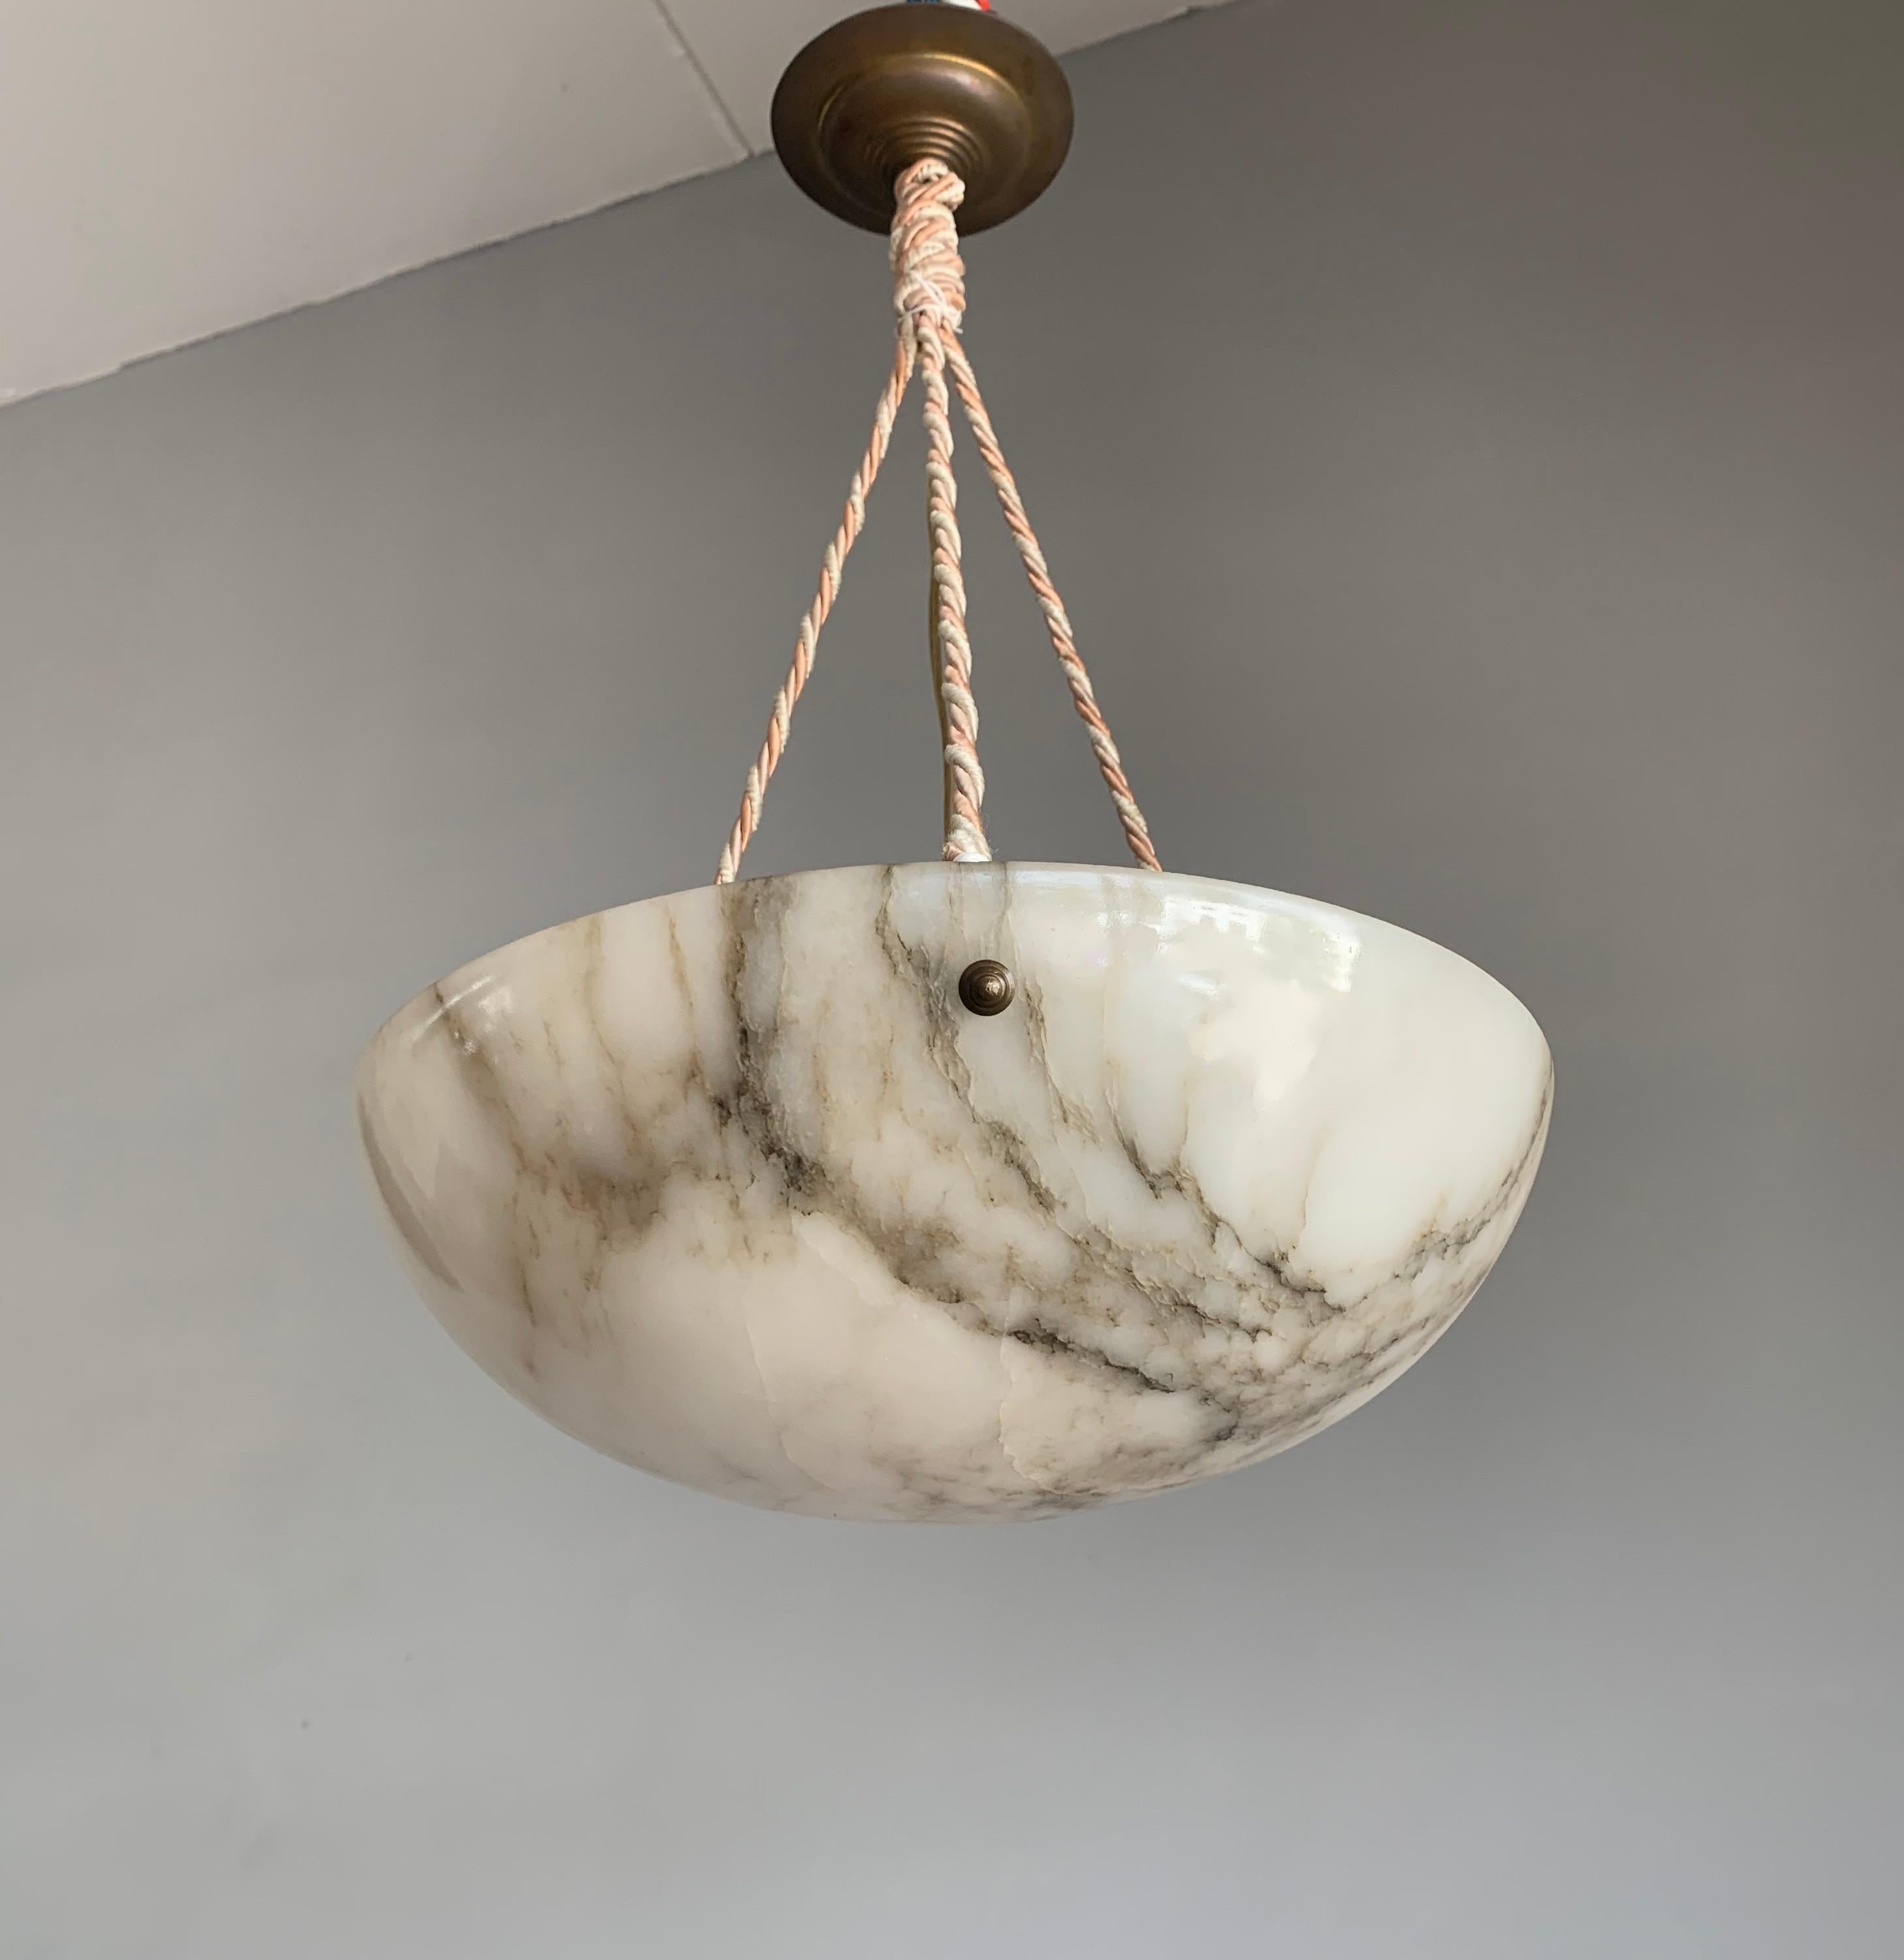 Hand-Carved Striking Art Deco Alabaster Shade Flushmount, Pendant Light with Rope and Canopy